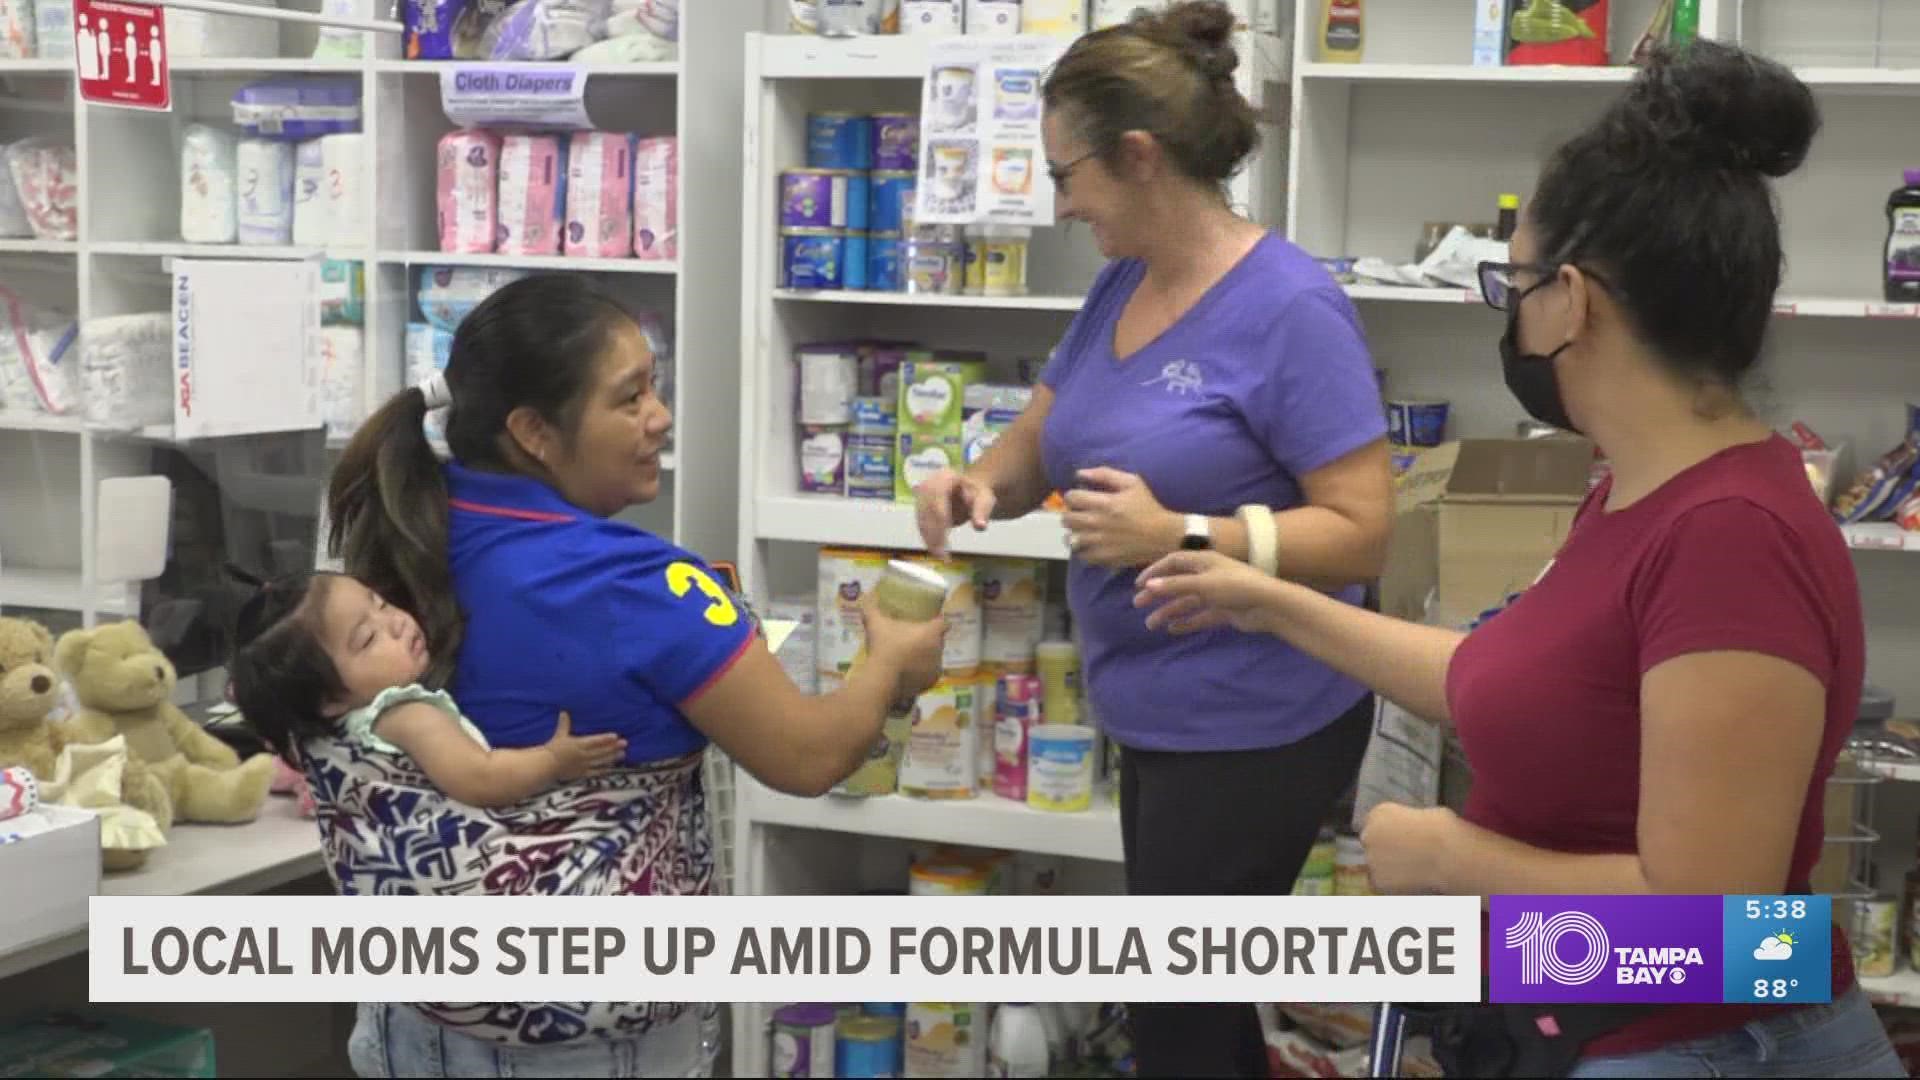 Shelves are still empty in many stores, and struggling families are getting creative in a bid to find a supply of baby formula for their infants.